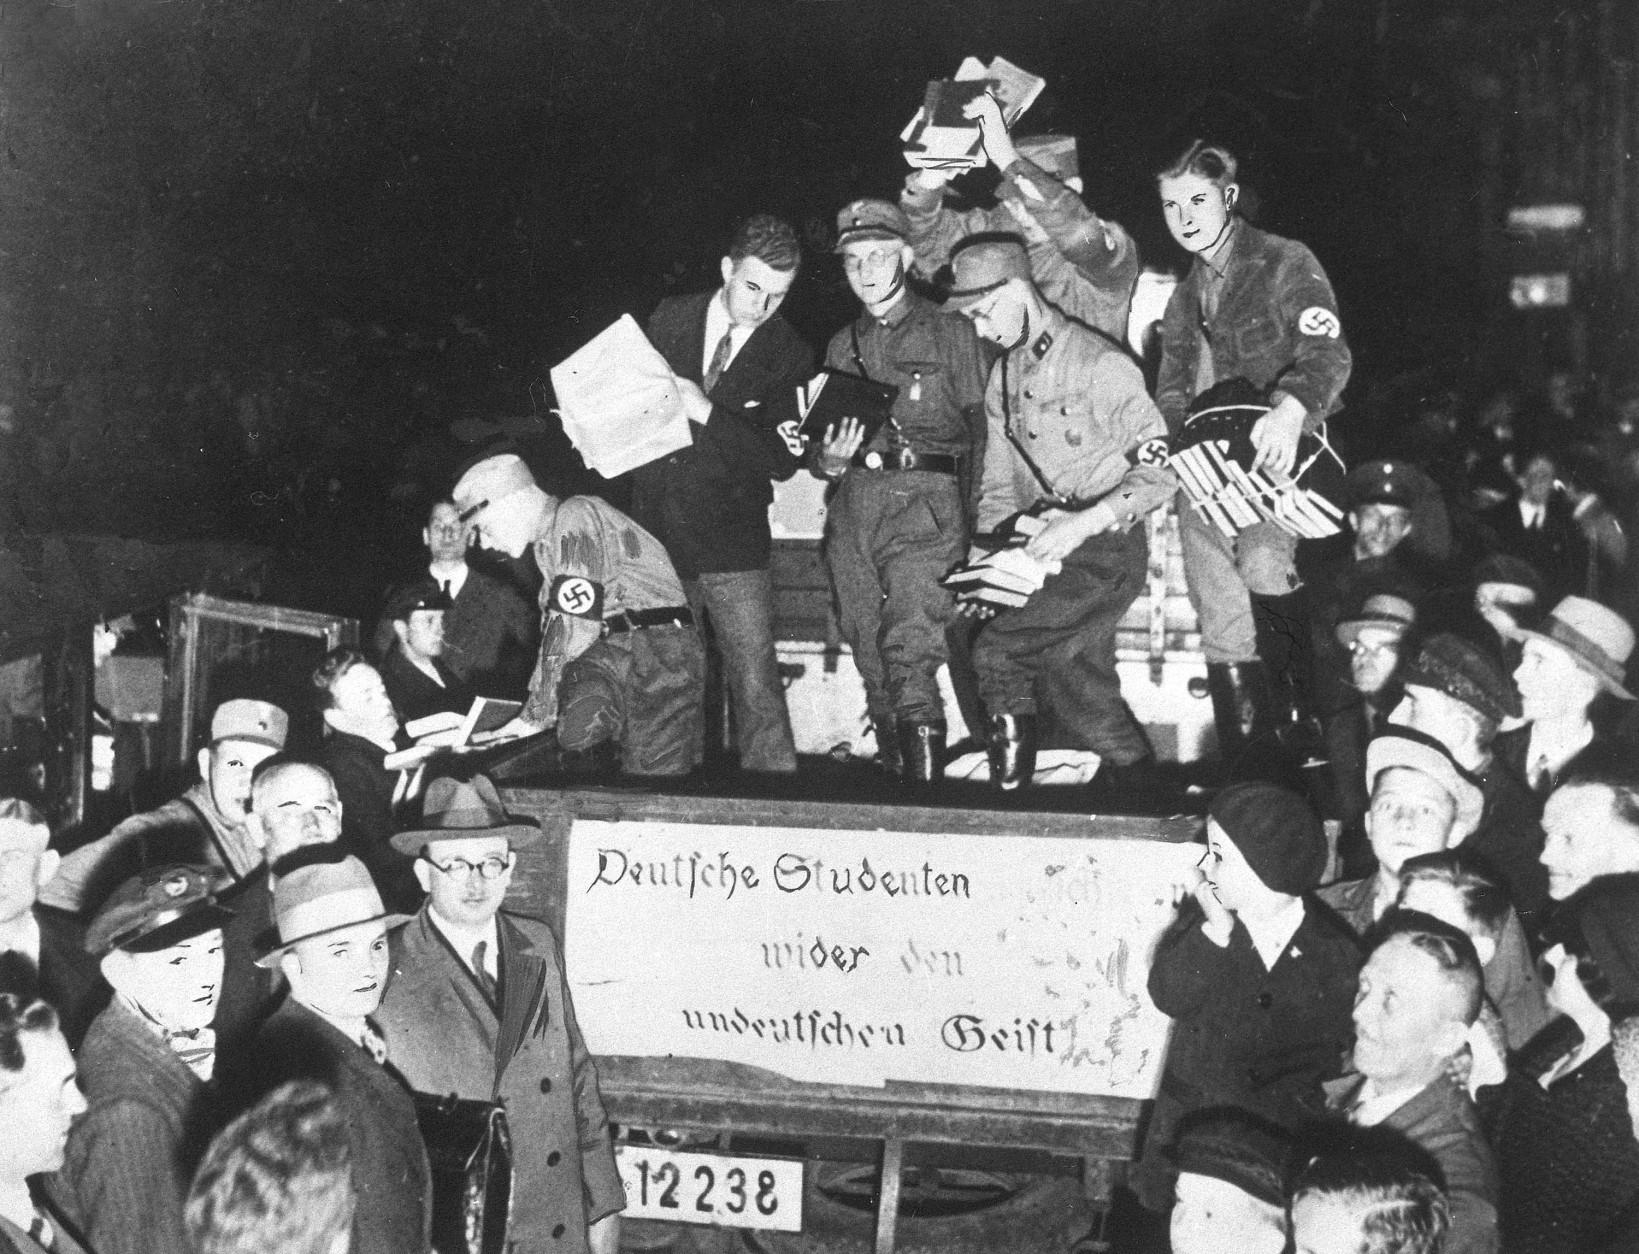 German students collect "un-German books" during the book burning campaign in Nazi Germany in 1933.  (AP Photo)